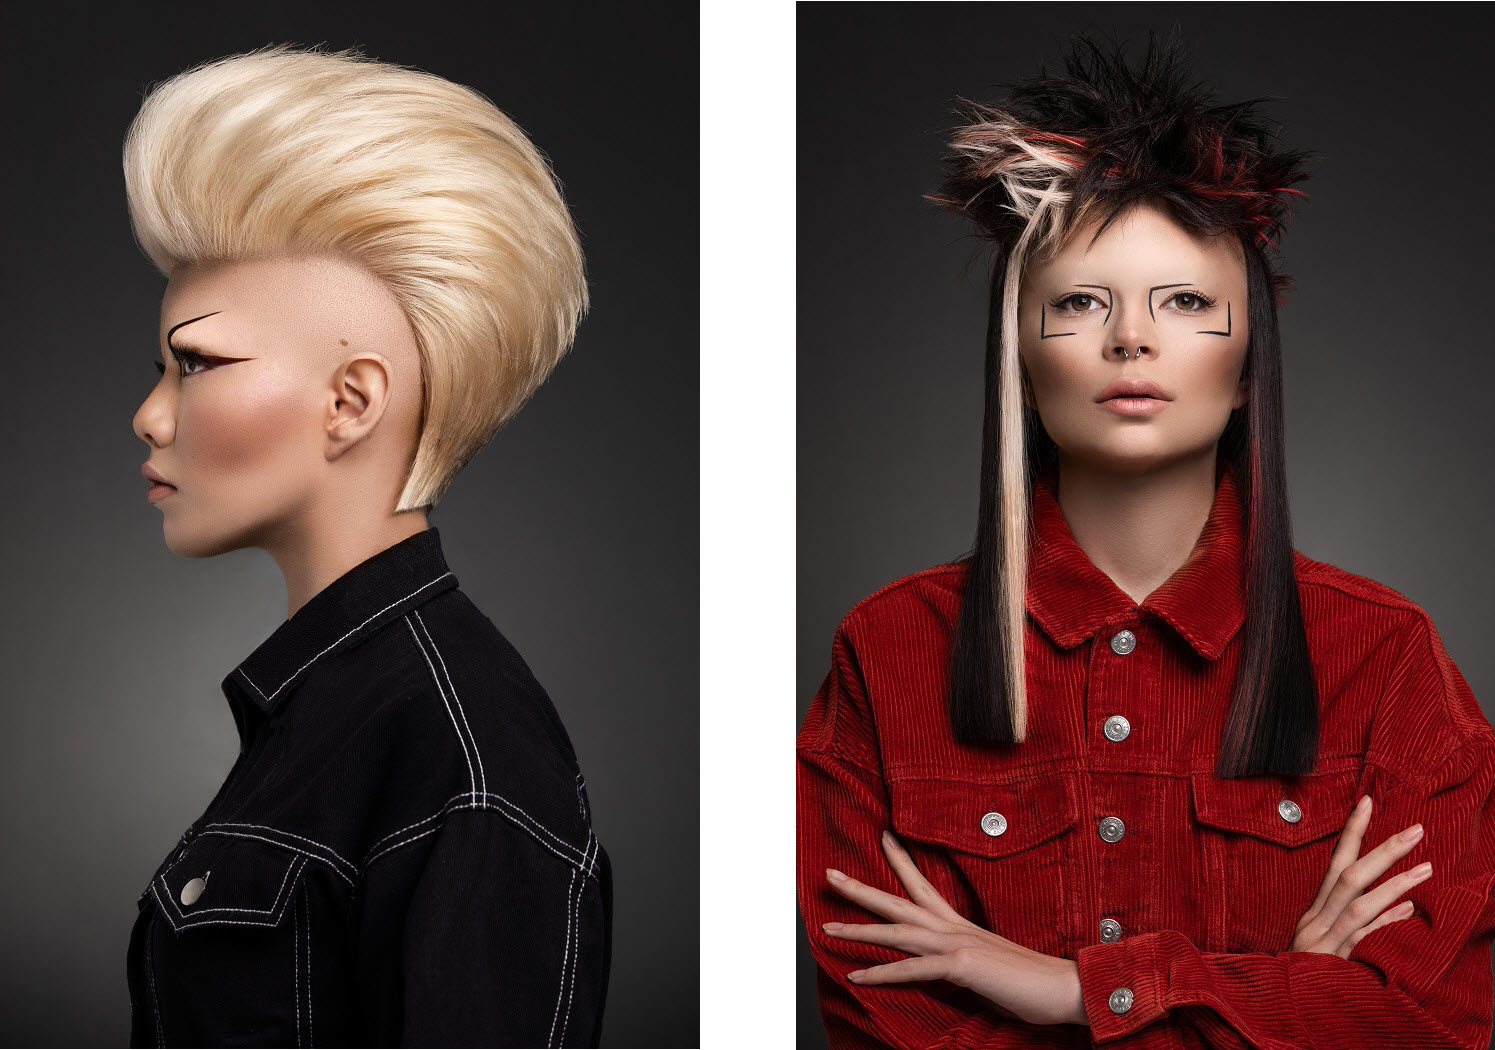 ch-naha-2019-finalists-master-hairstylist-of-the-year